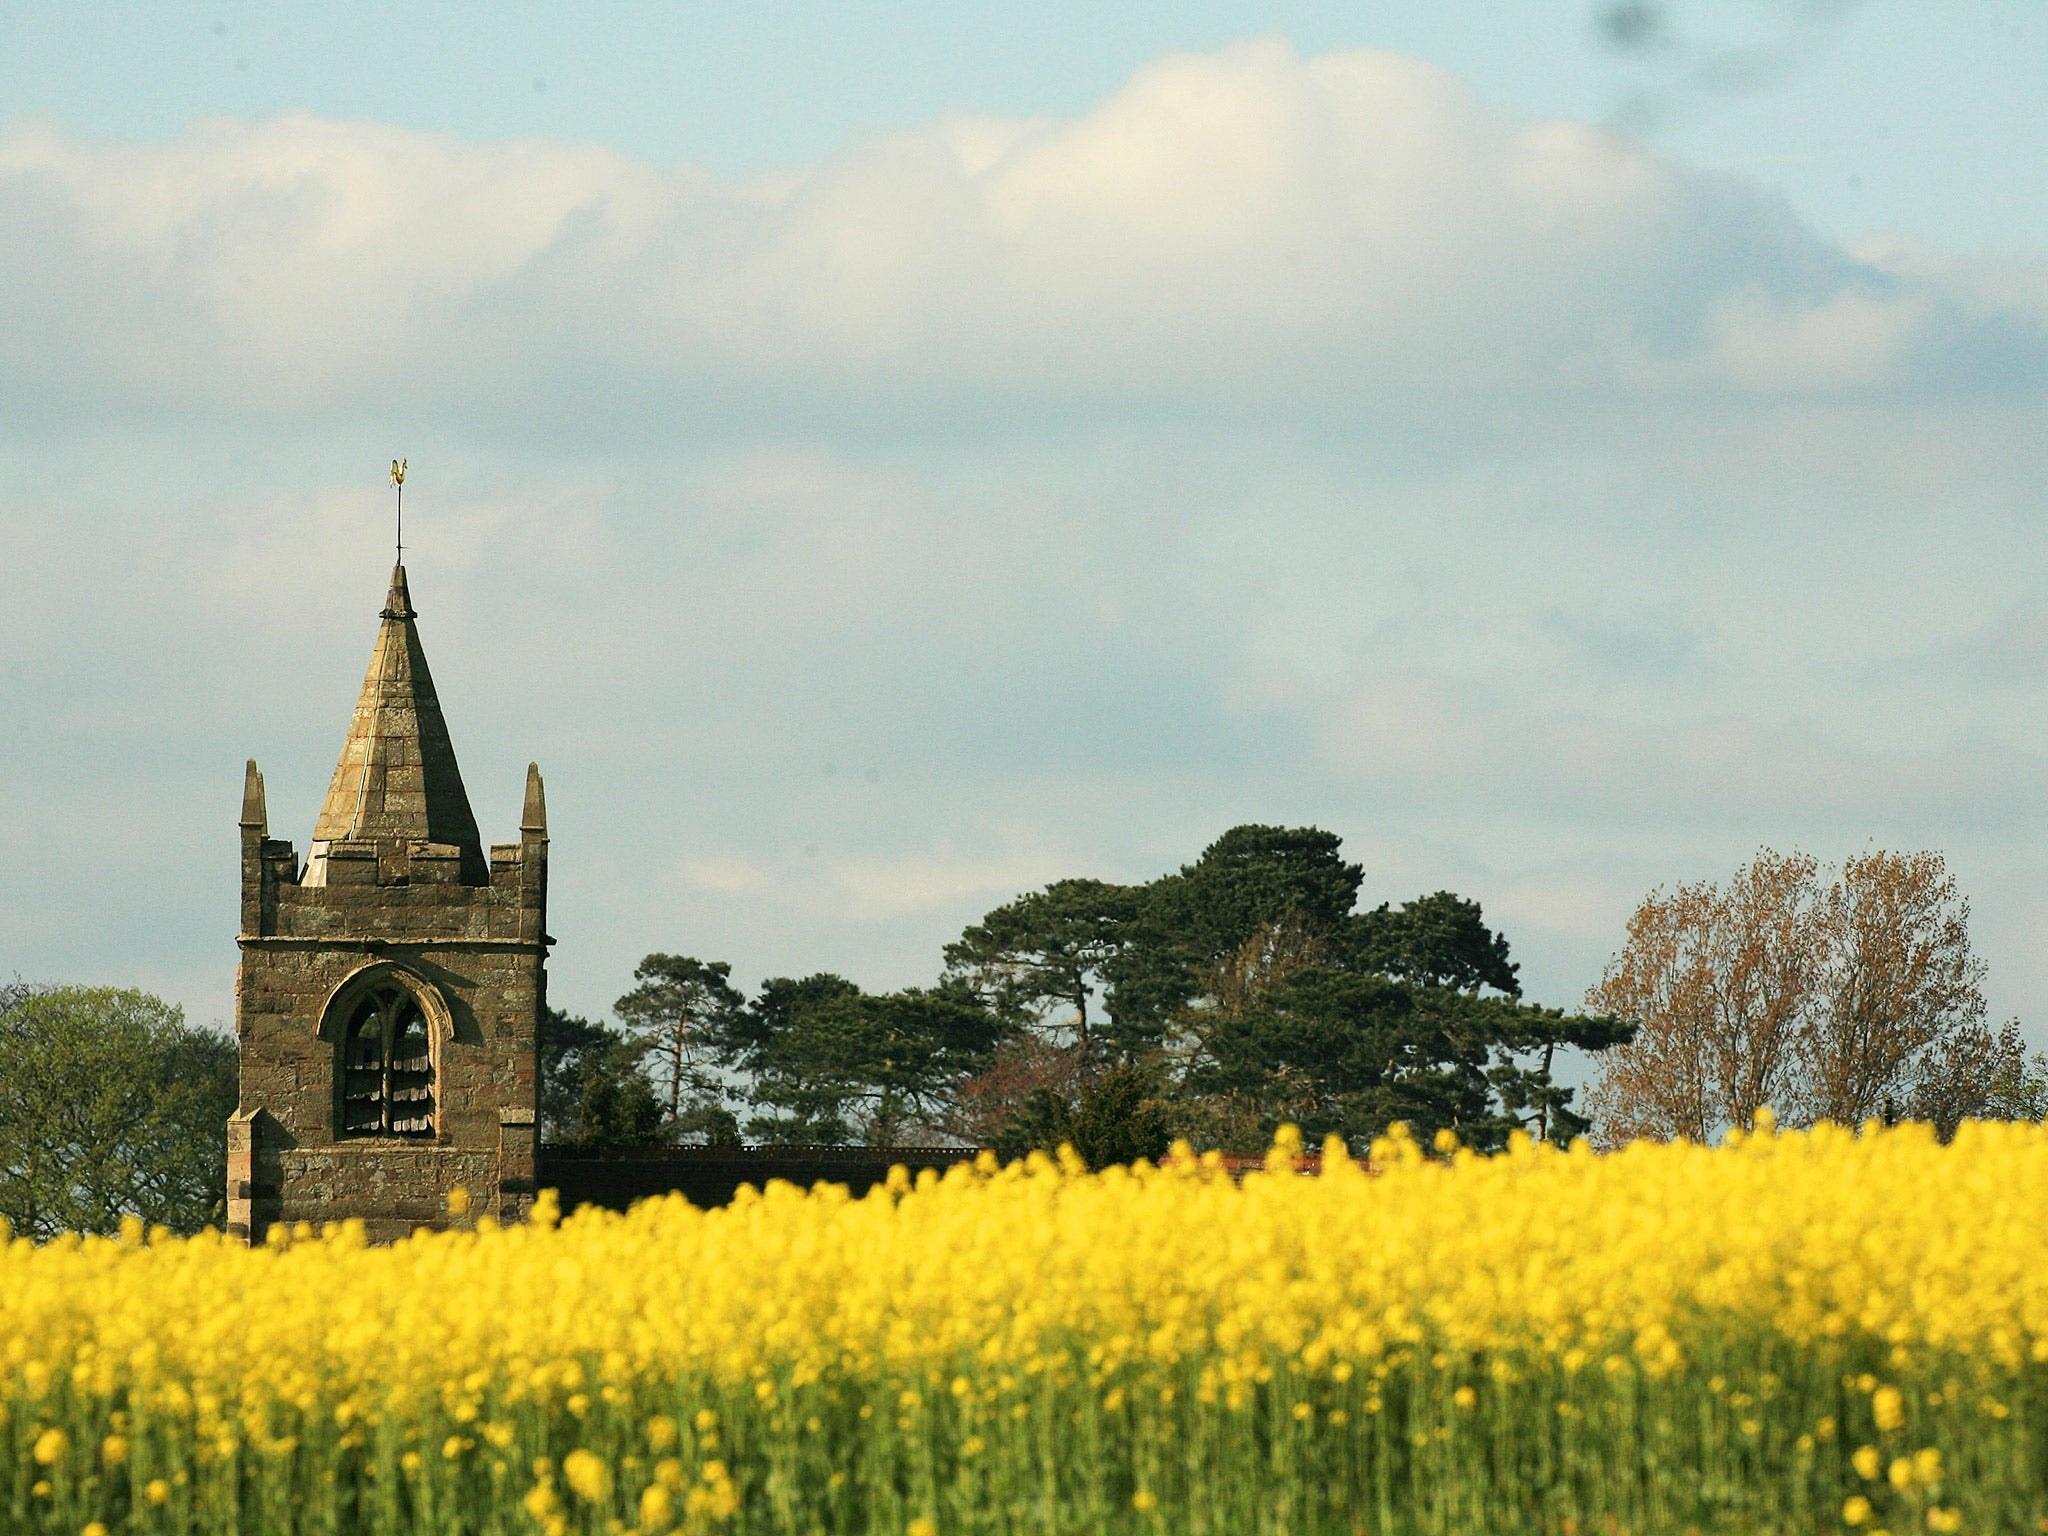 The Church has an enormous estate which includes properties in villages, towns and cities across the country. File photo